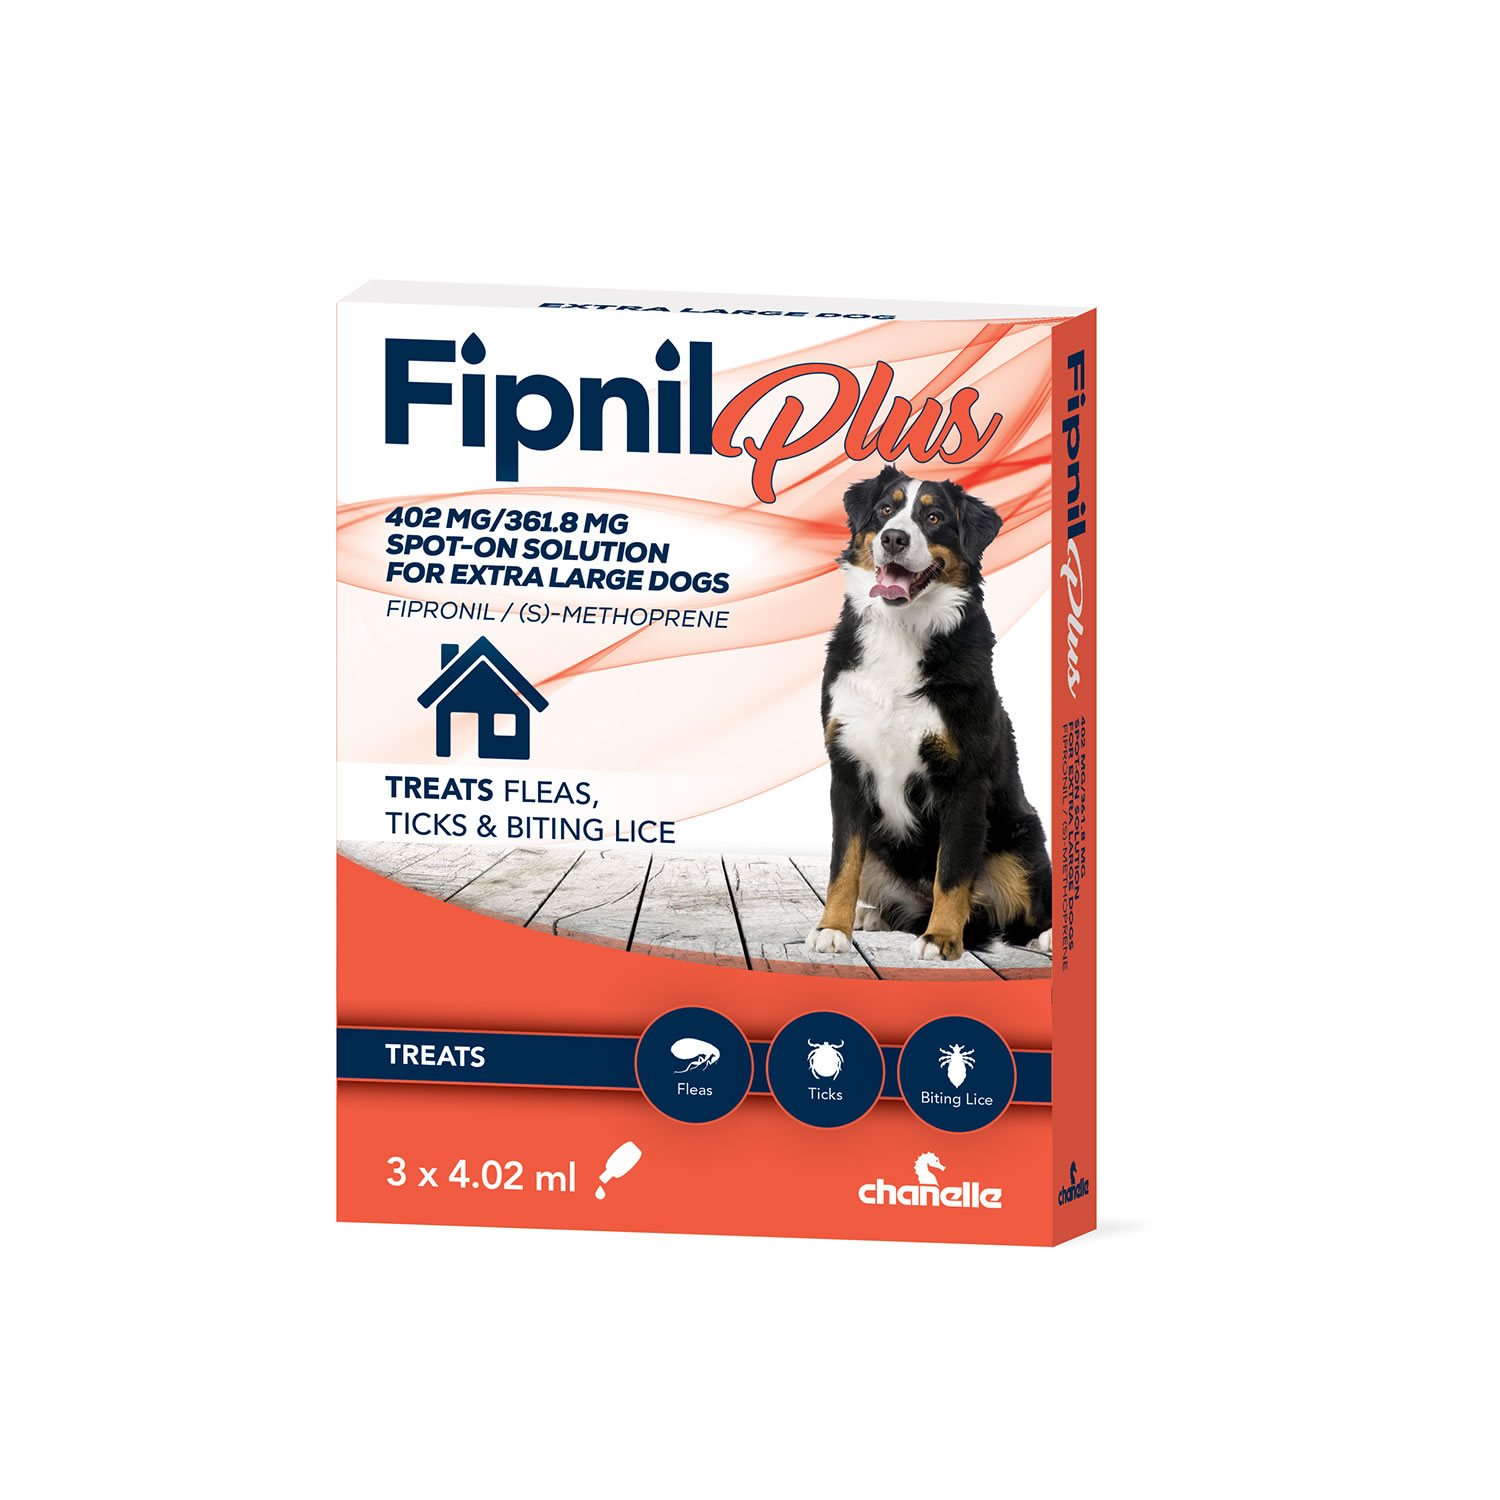 CHANELLE FIPNIL PLUS SPOT-ON FOR EXTRA LARGE DOGS 3 PIPETTES 40 - 60 KG - 3 PIPETTES